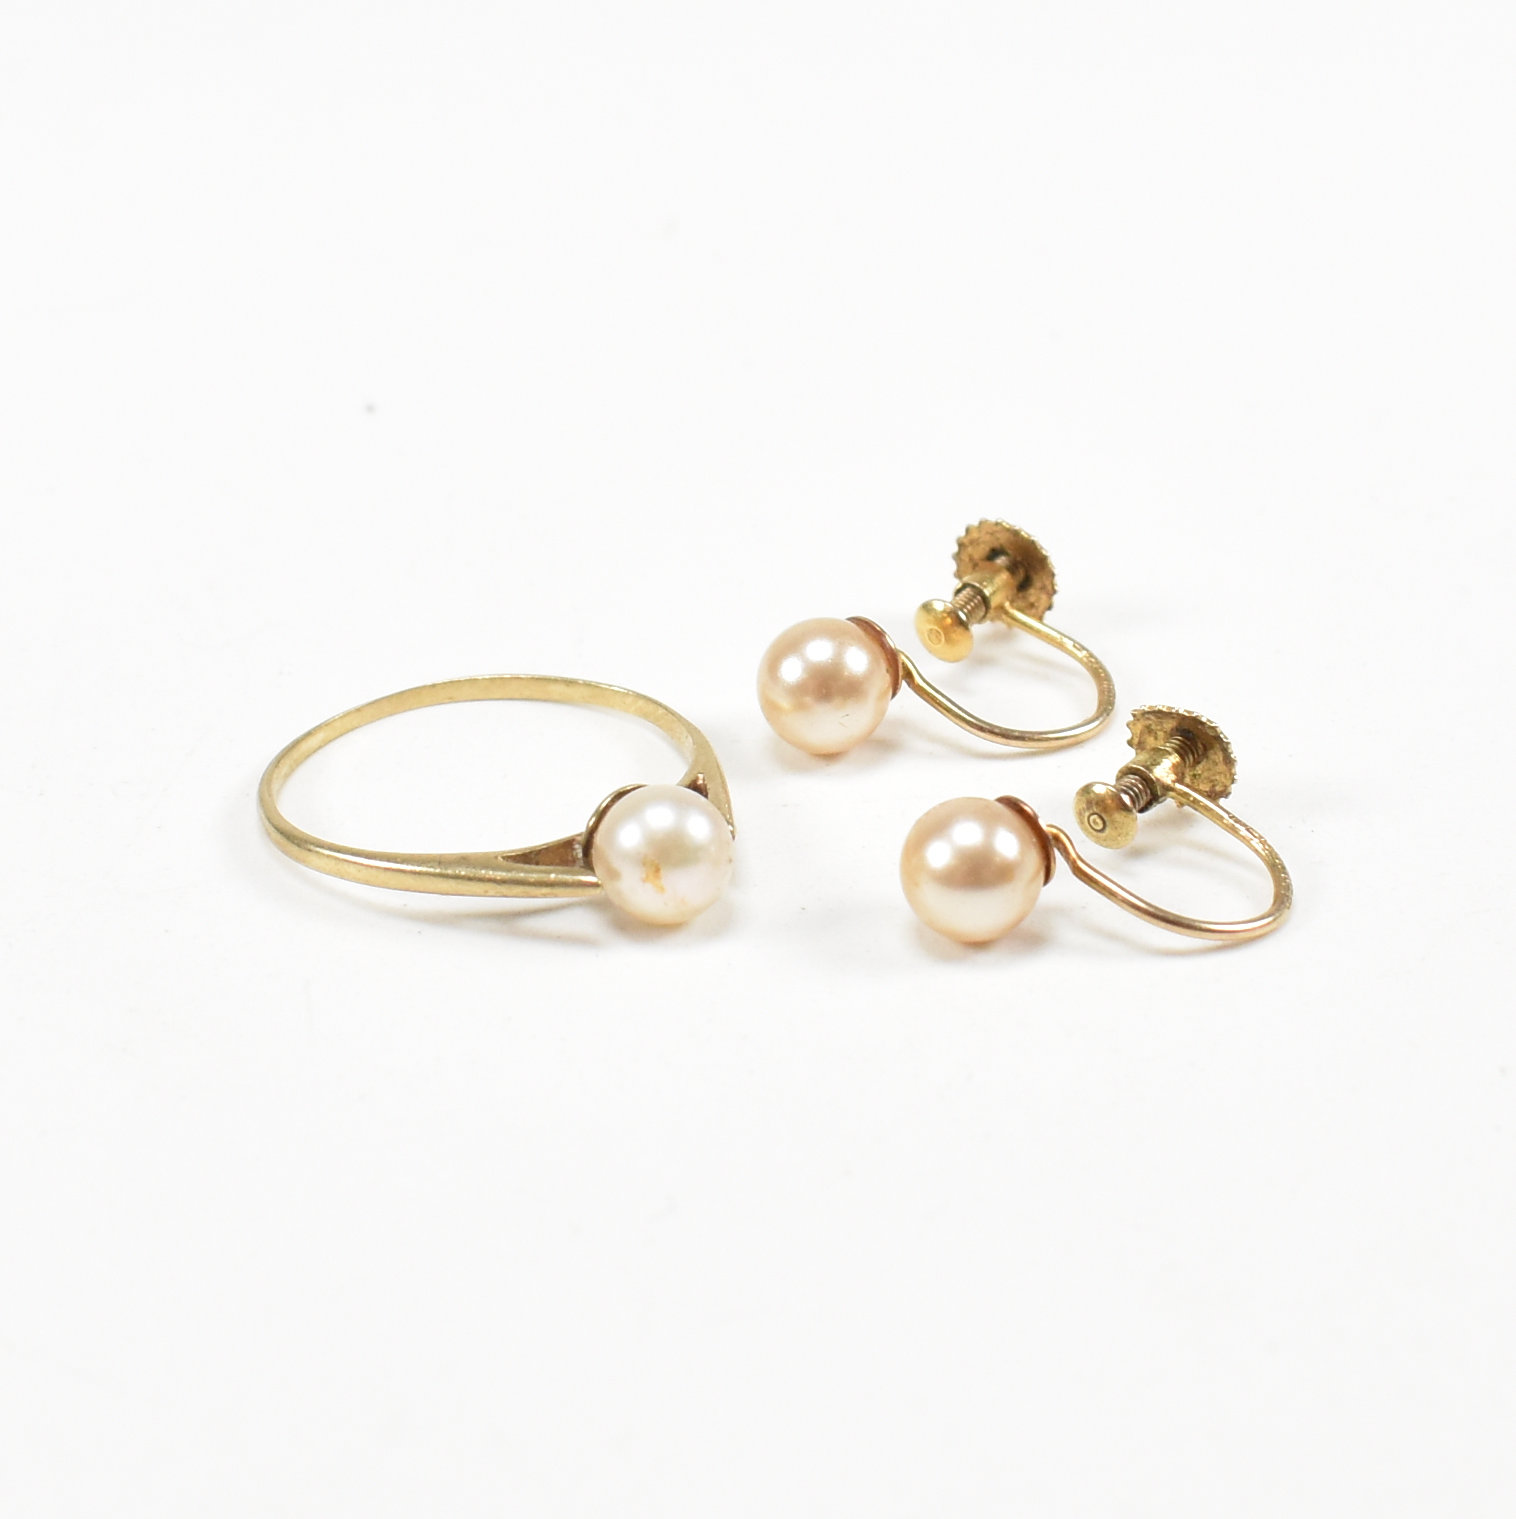 VINTAGE HALLMARKED 9CT GOLD SCREW BACK EARRINGS & RING - Image 4 of 10